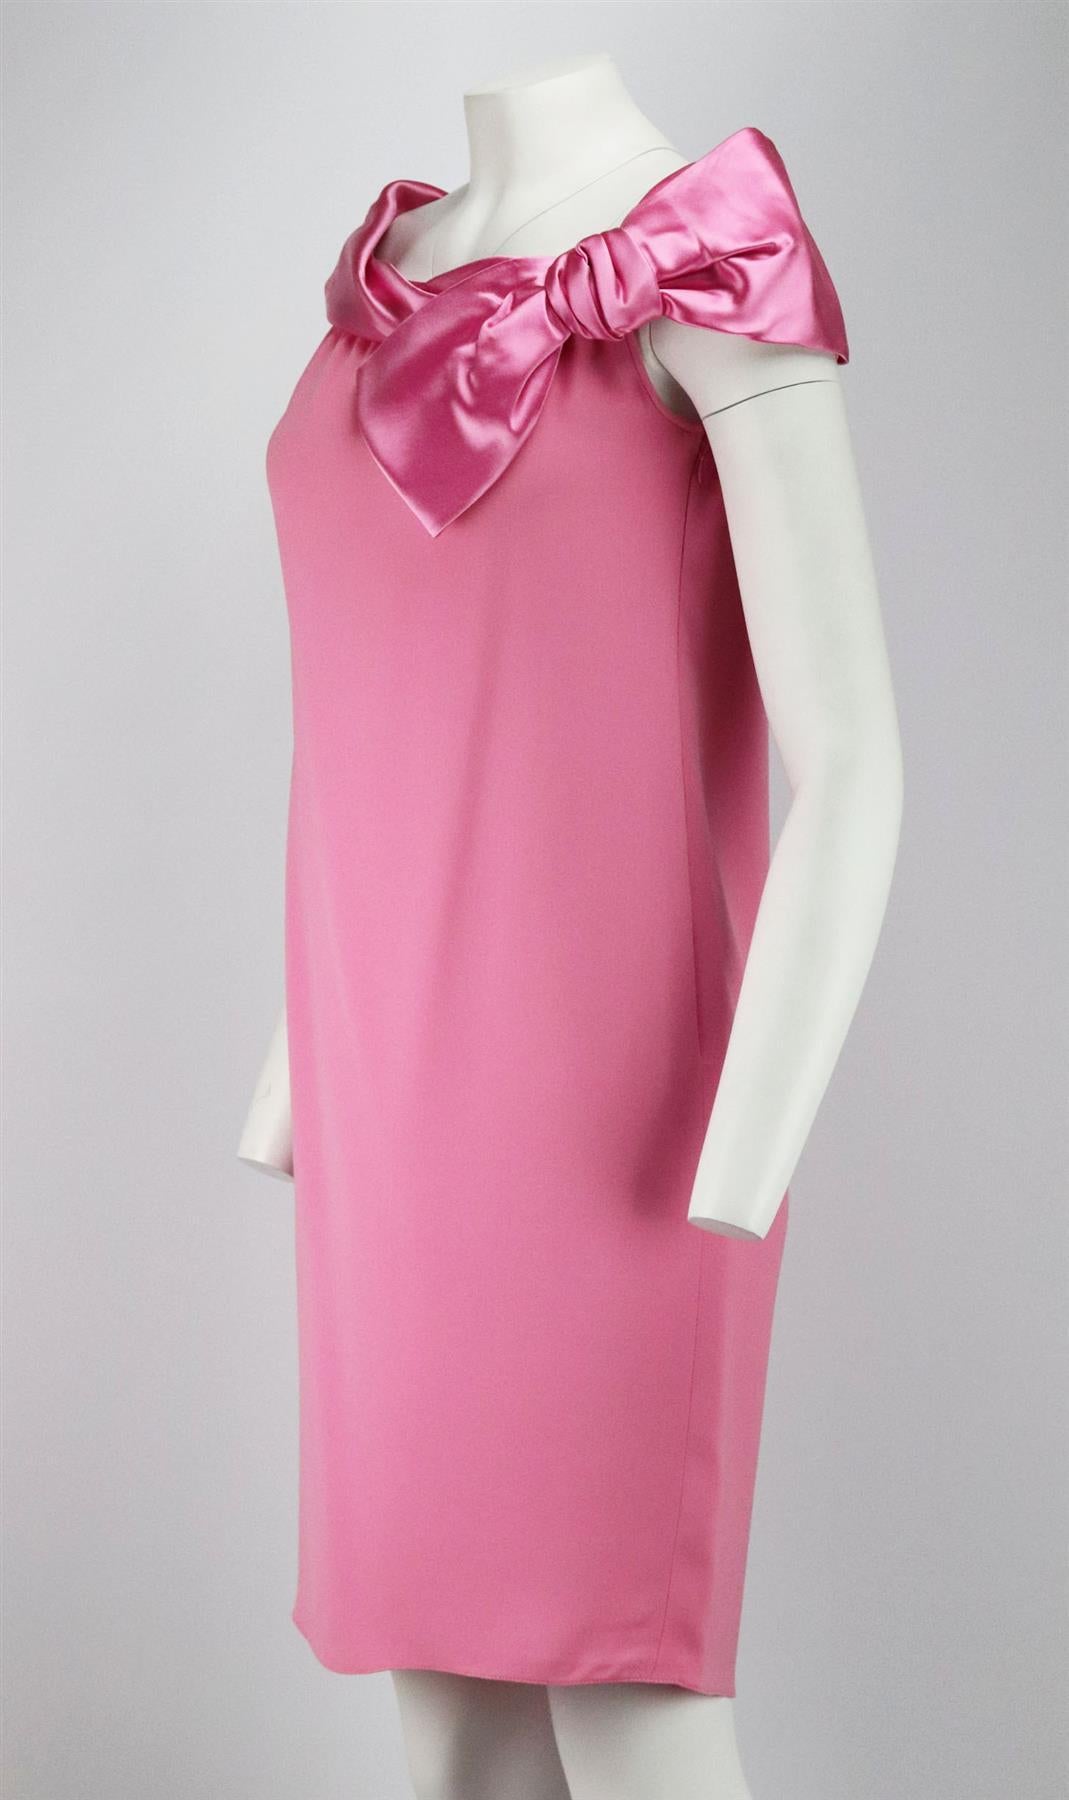 This vintage dress by Valentino is made from bright-pink silk satin and crepe, it has draped bow detail along the neckline in silk-satin and a slim silhouette body in crepe. Pink silk. Concealed zip fastening at side. 100% Silk; lining: 100% silk.